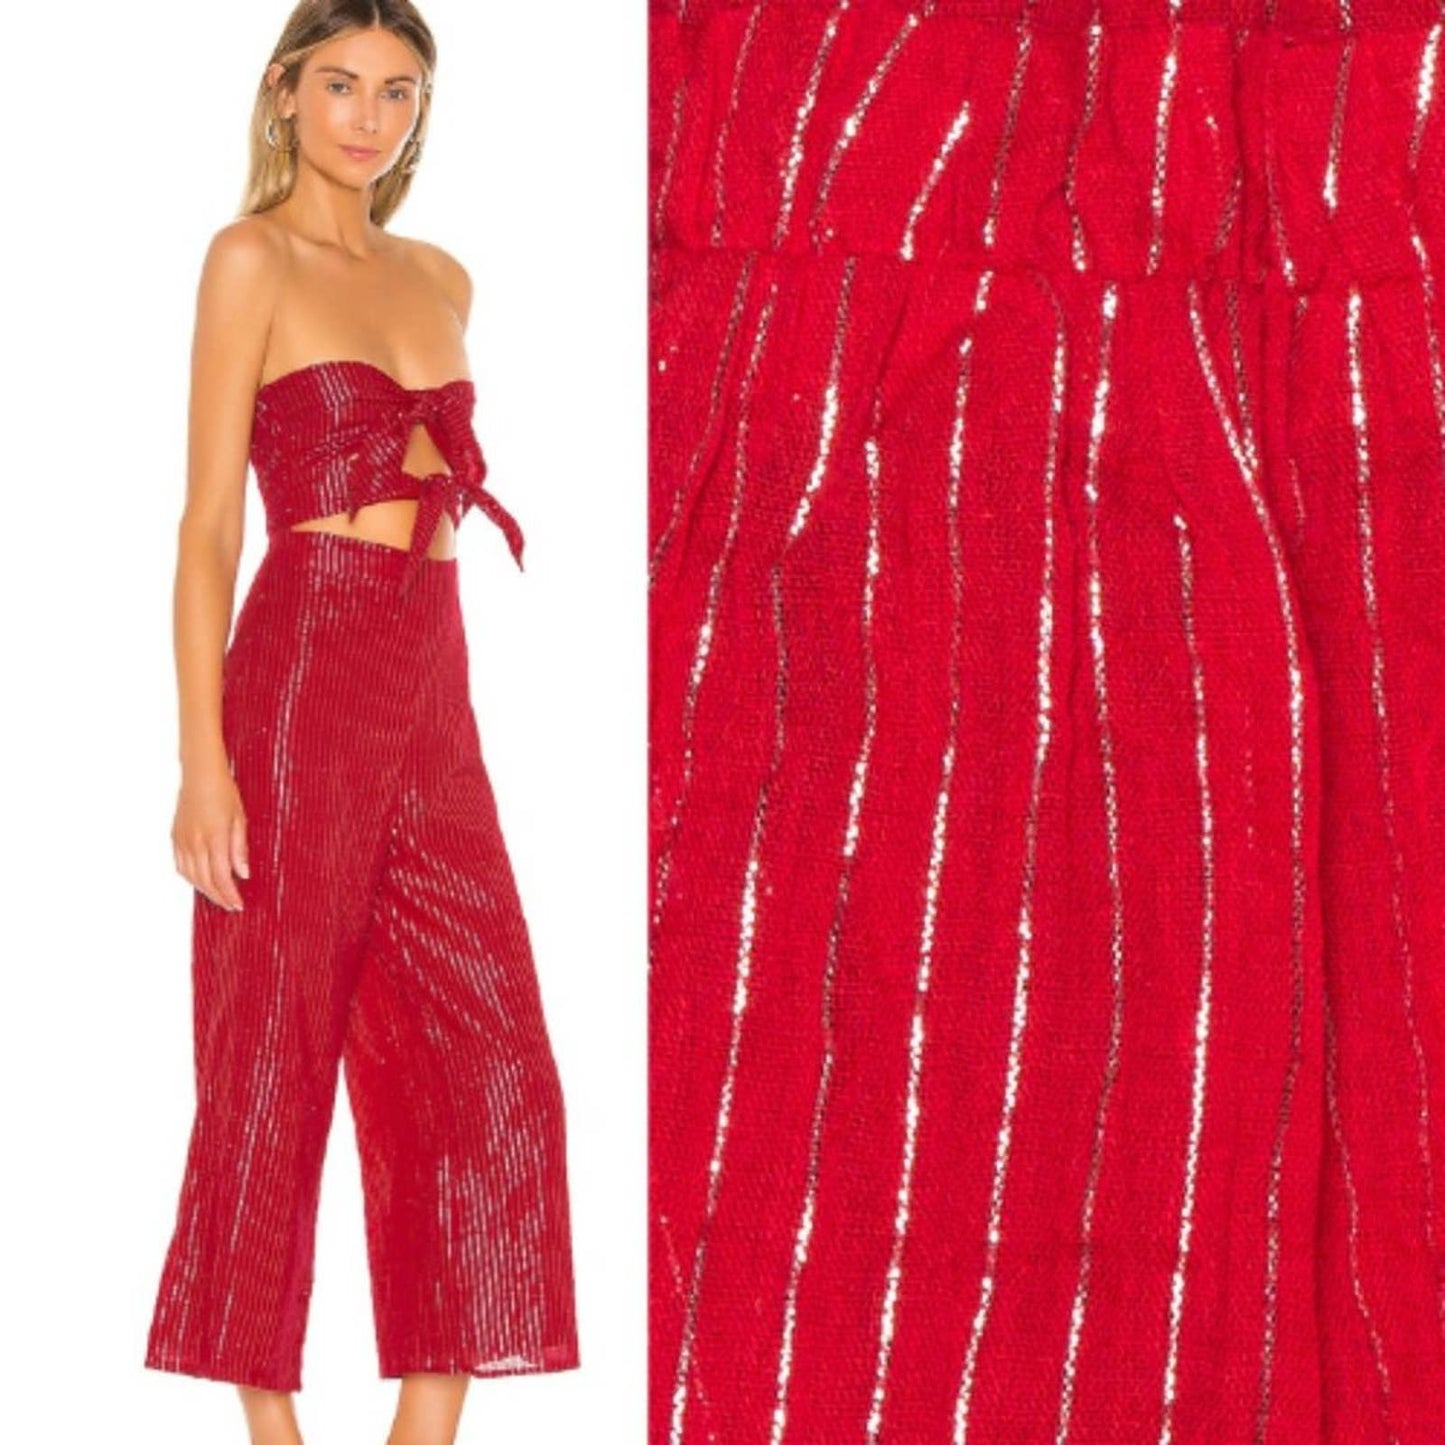 MAJORELLE Tessa Jumpsuit in Red NWOT Size Small